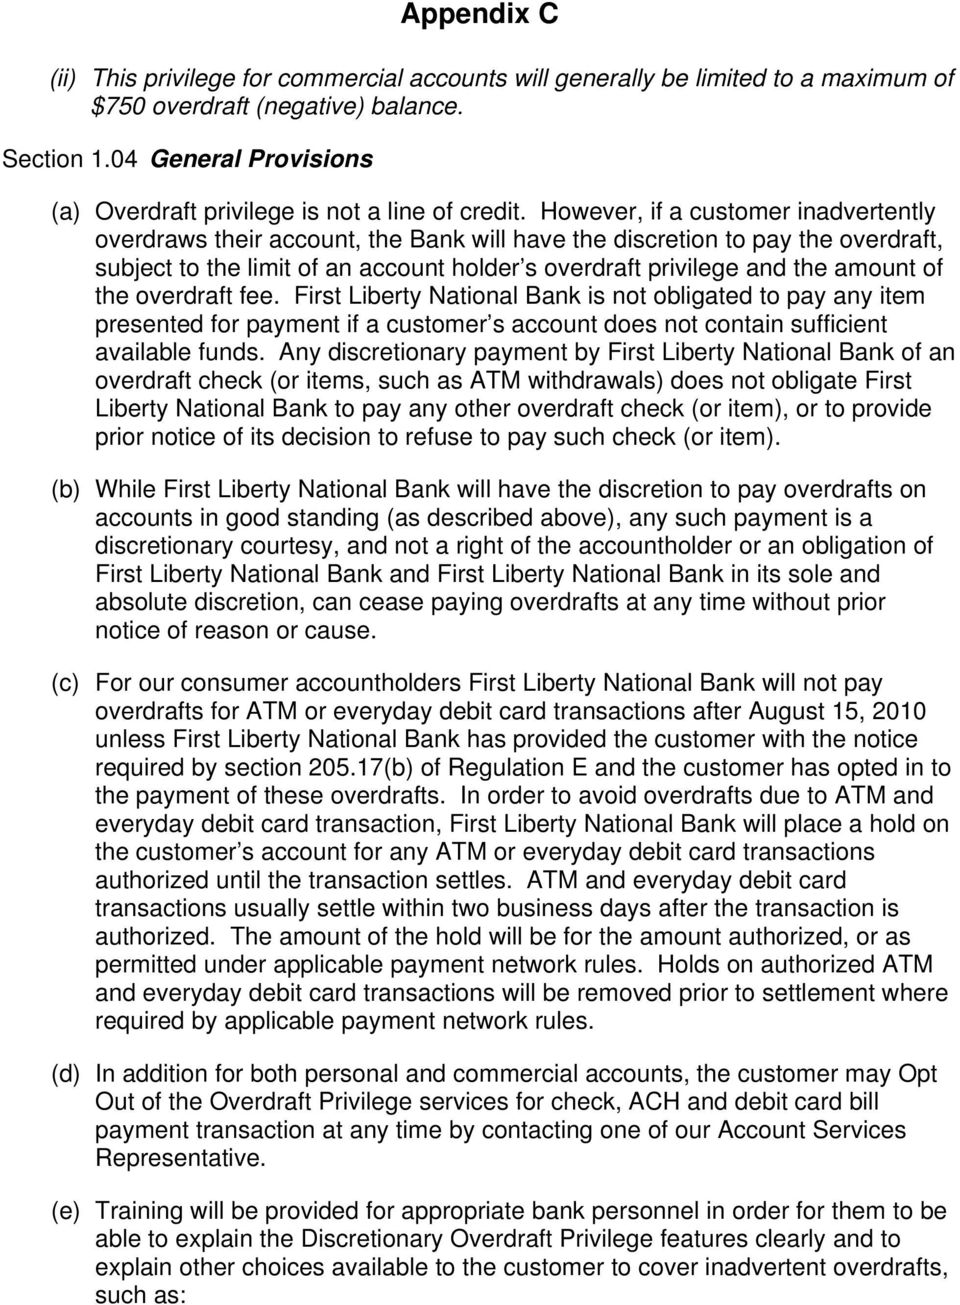 However, if a customer inadvertently overdraws their account, the Bank will have the discretion to pay the overdraft, subject to the limit of an account holder s overdraft privilege and the amount of